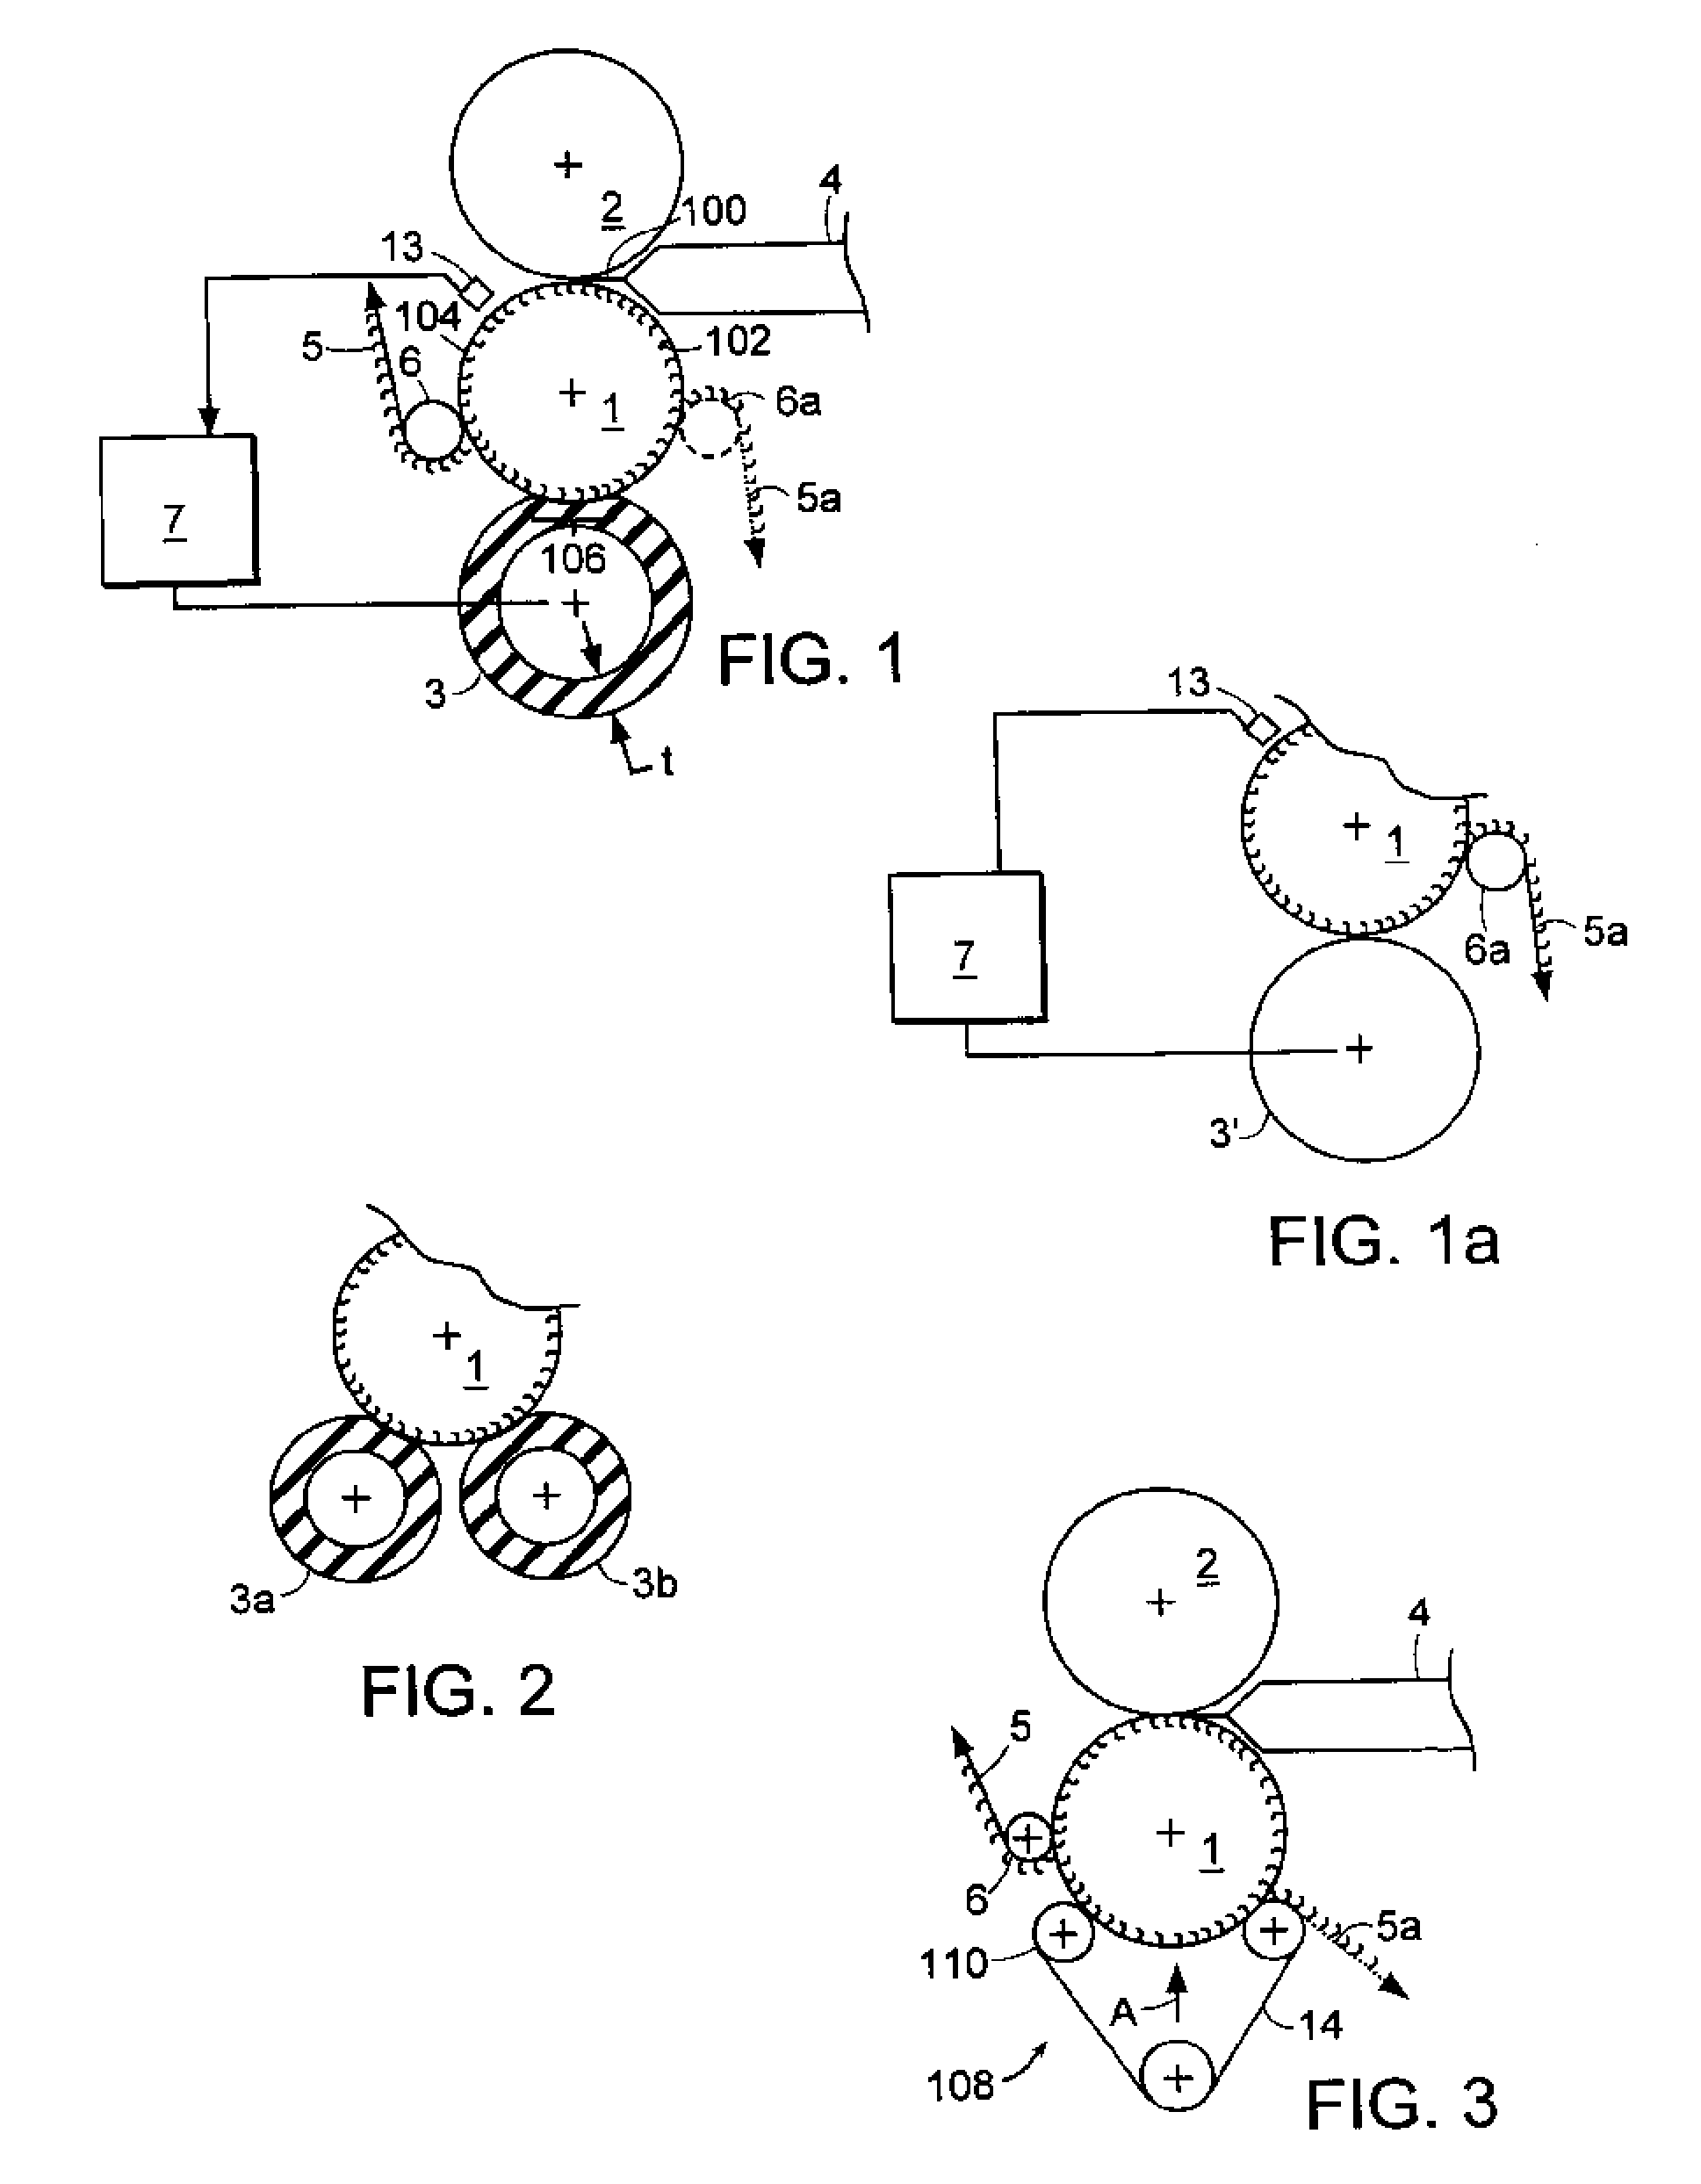 Continuous molding of fastener products and the like and products produced thereby